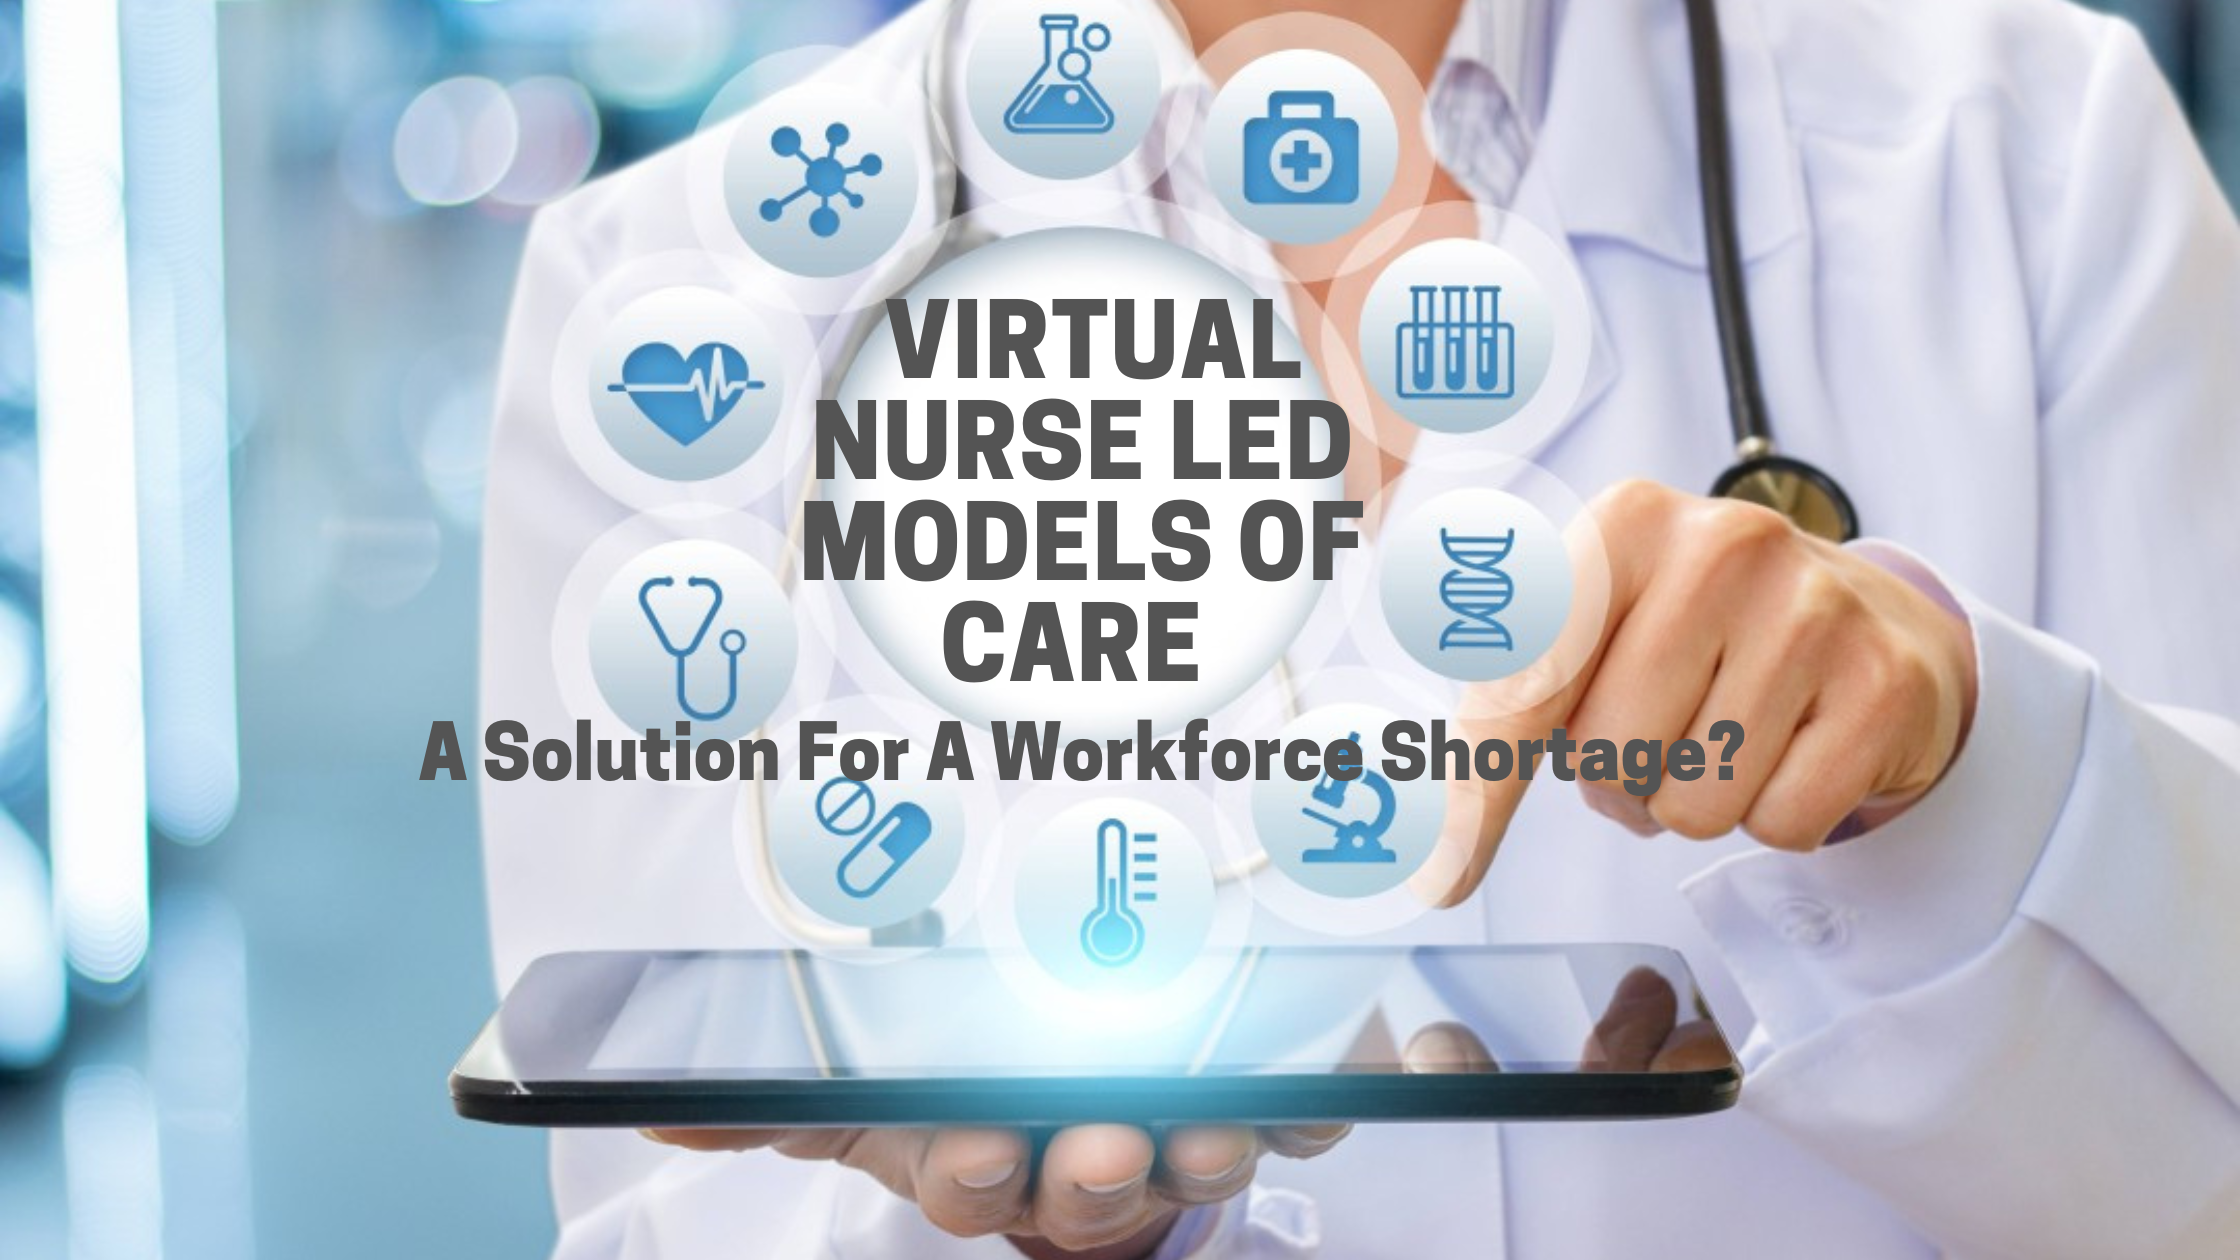 Could Virtual Nurse Led Models Of Care Be A Solution For A Workforce Shortage?